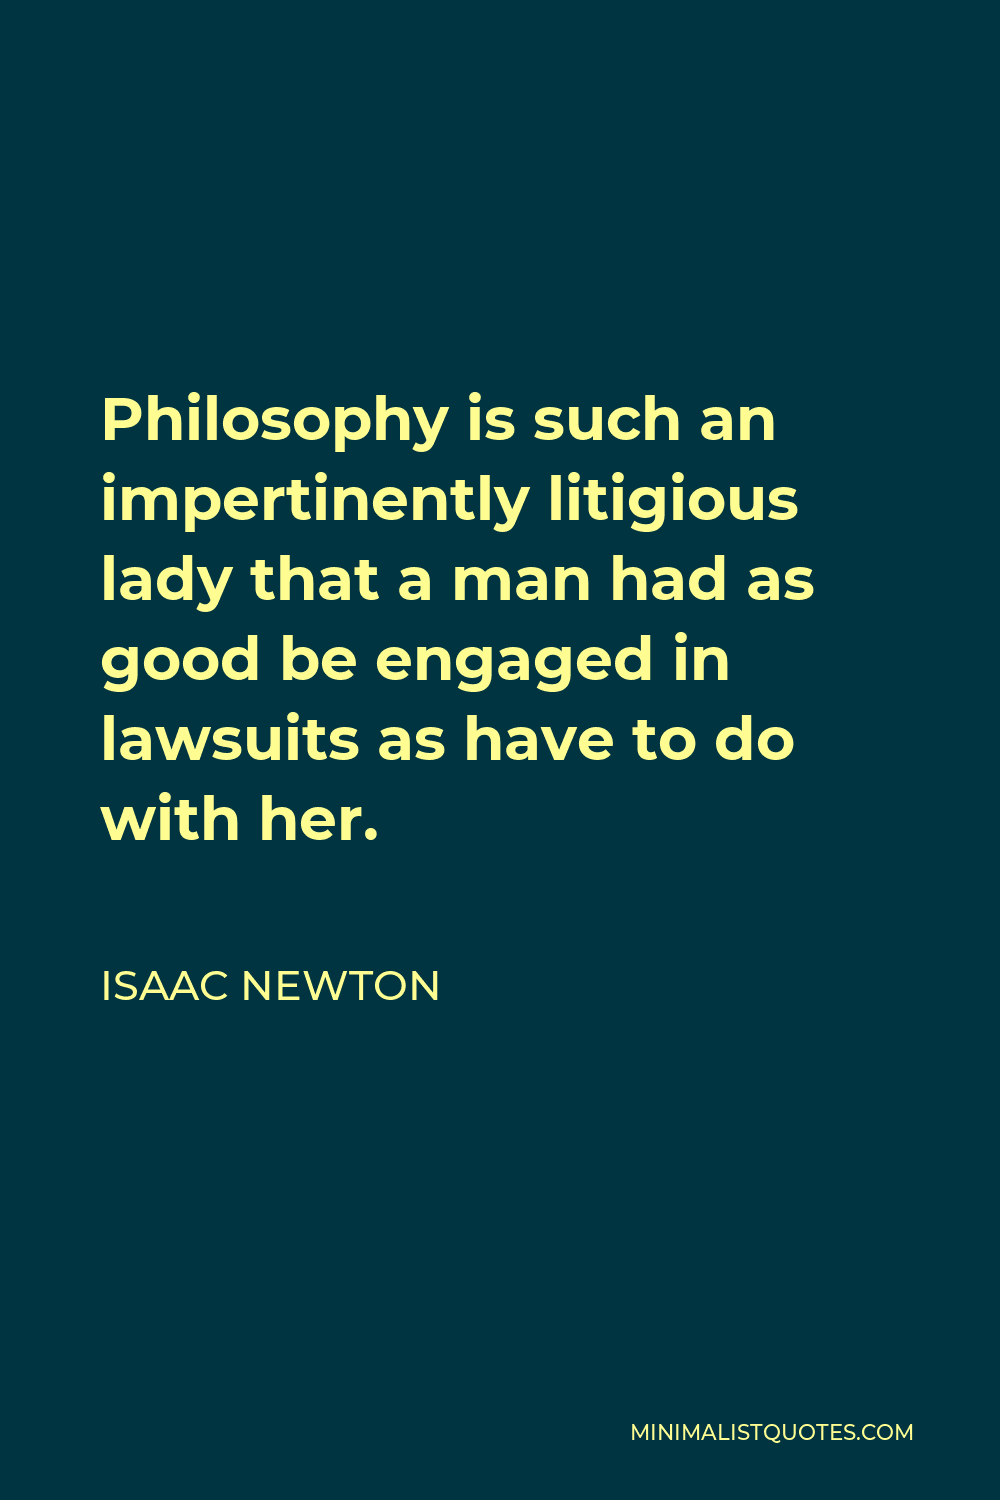 Isaac Newton Quote - Philosophy is such an impertinently litigious lady that a man had as good be engaged in lawsuits as have to do with her.